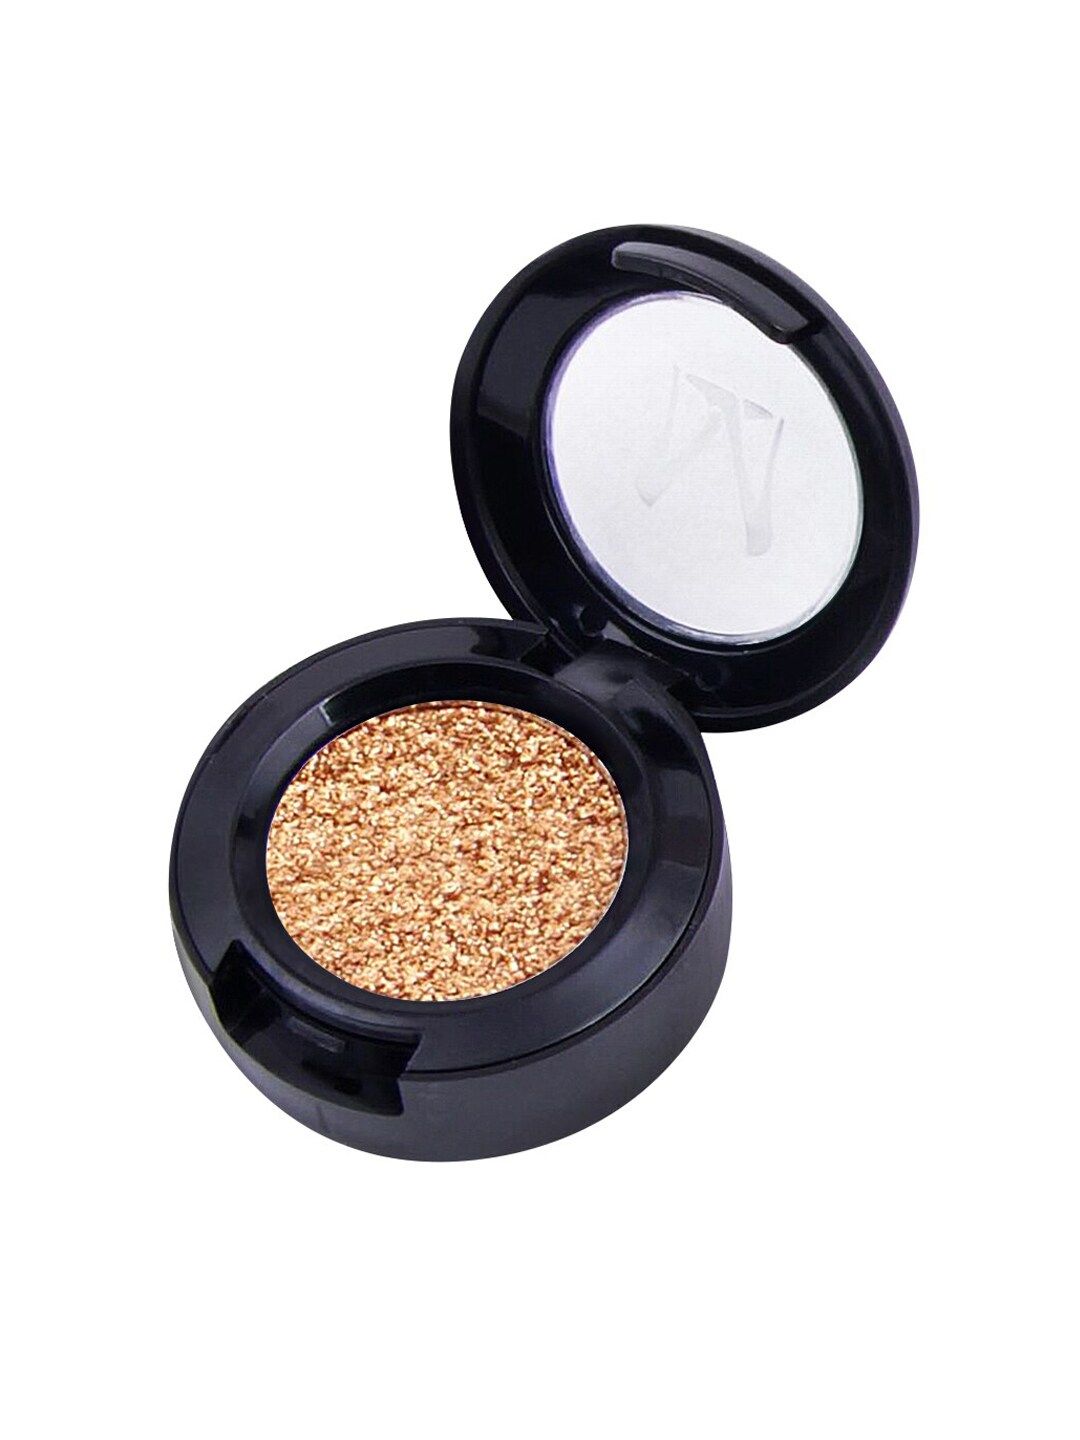 MISS ROSE Gold-Toned Single Color Shinning Glitter Glow Pigment Eyeshadow Price in India